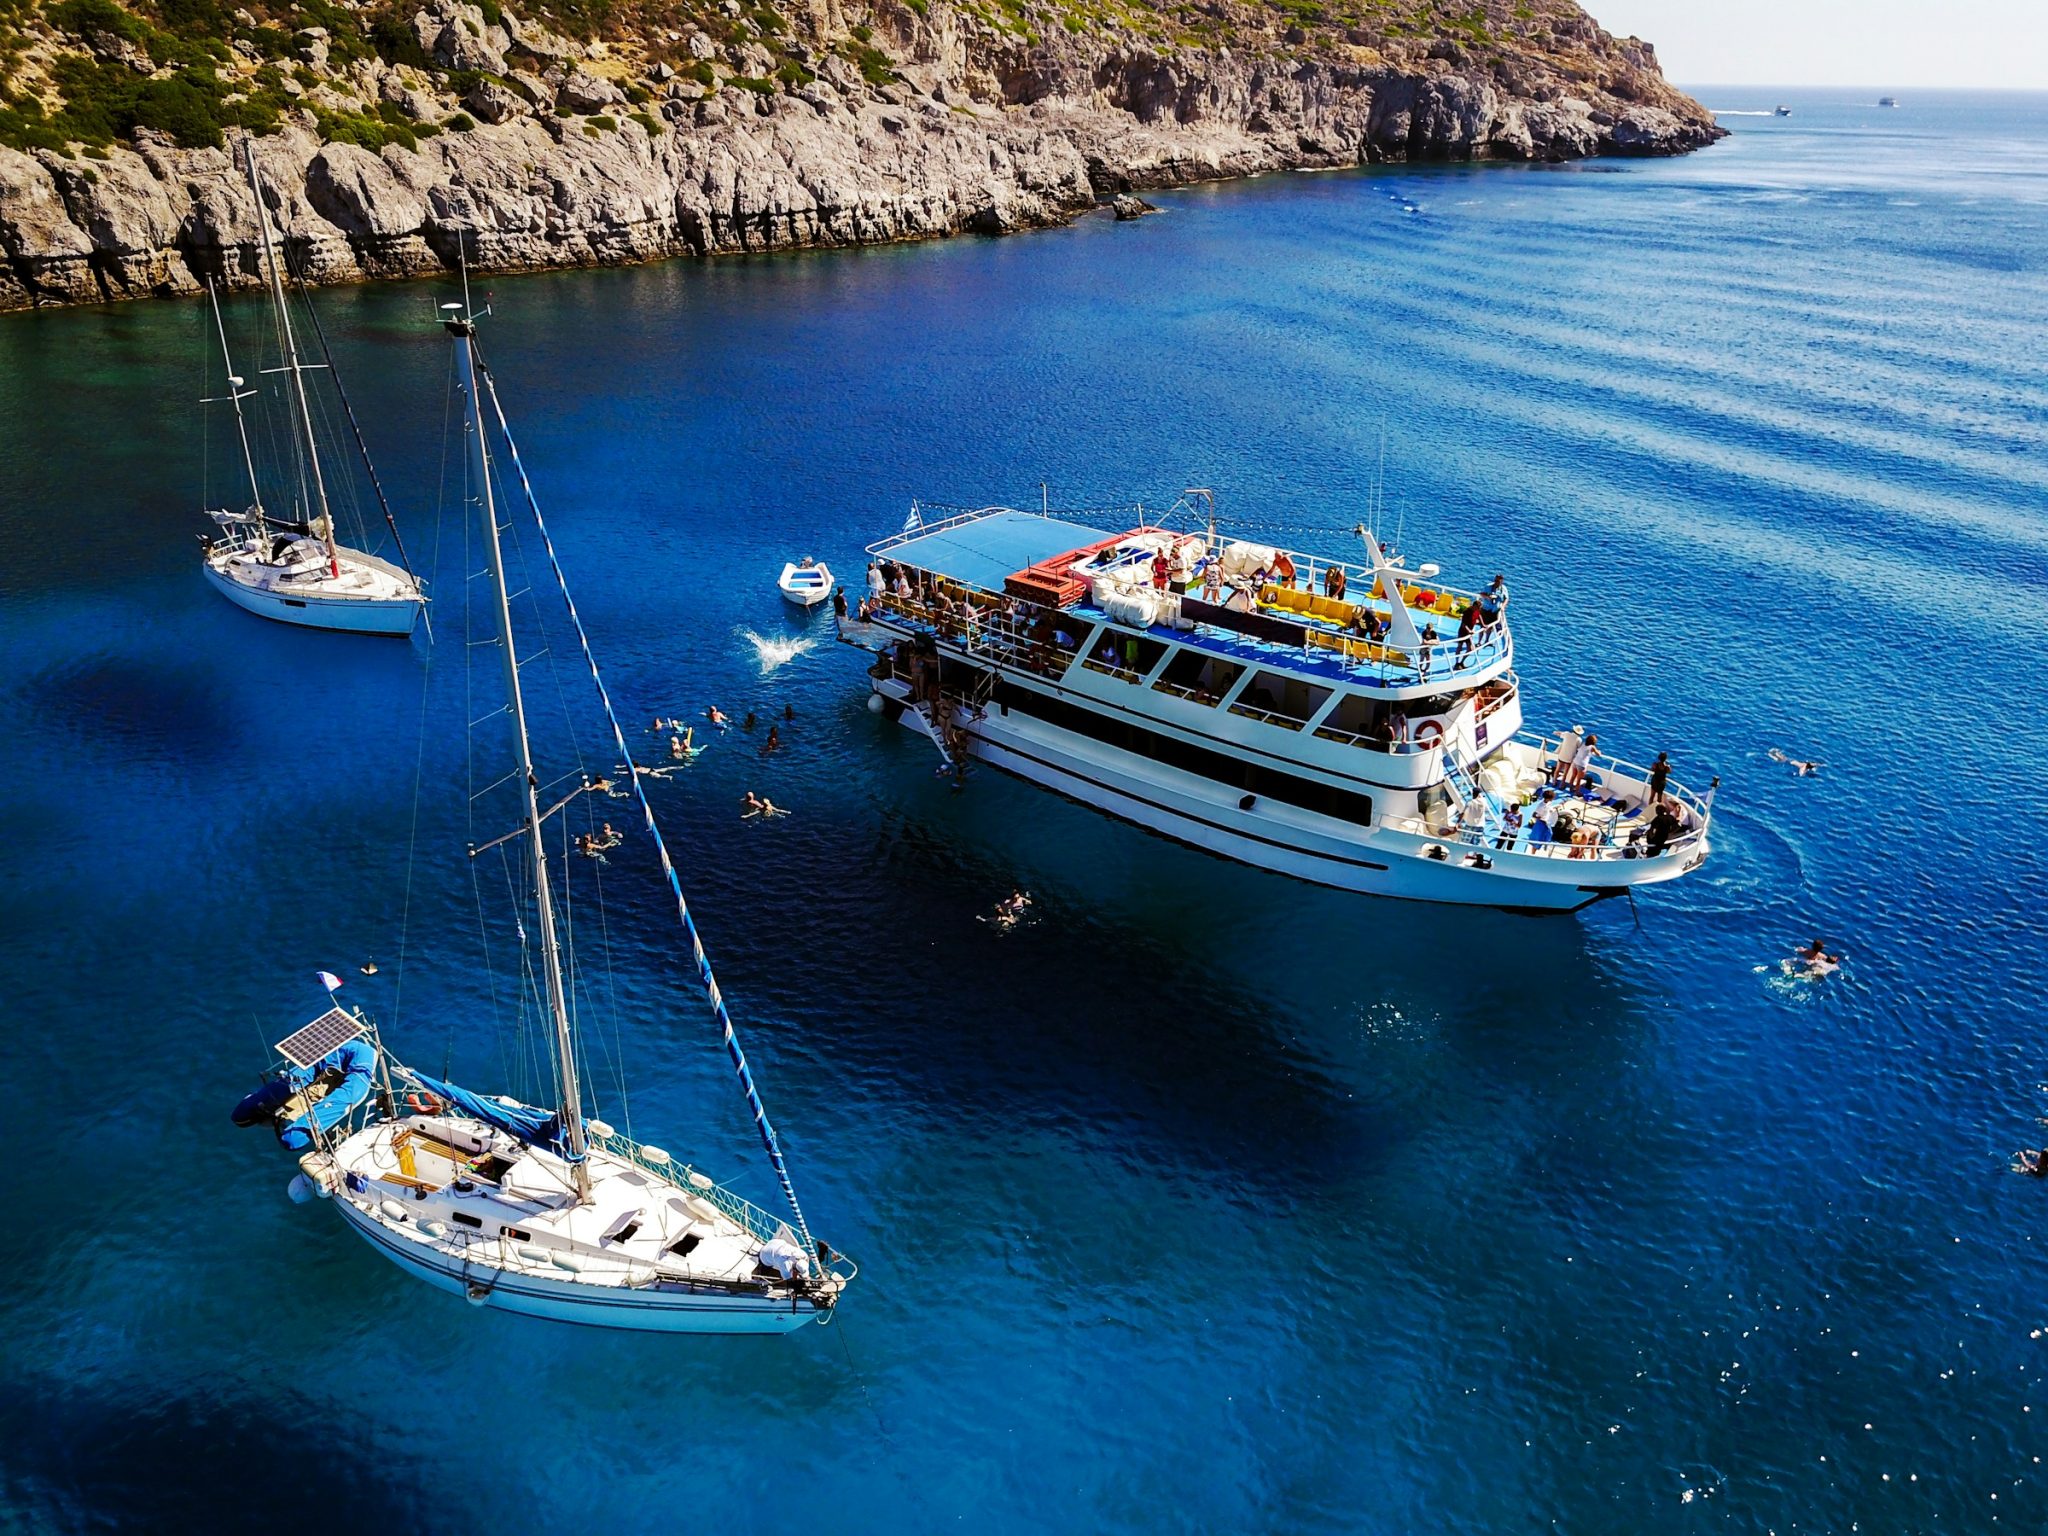 Top 5 tips to planning all-inclusive yacht vacations